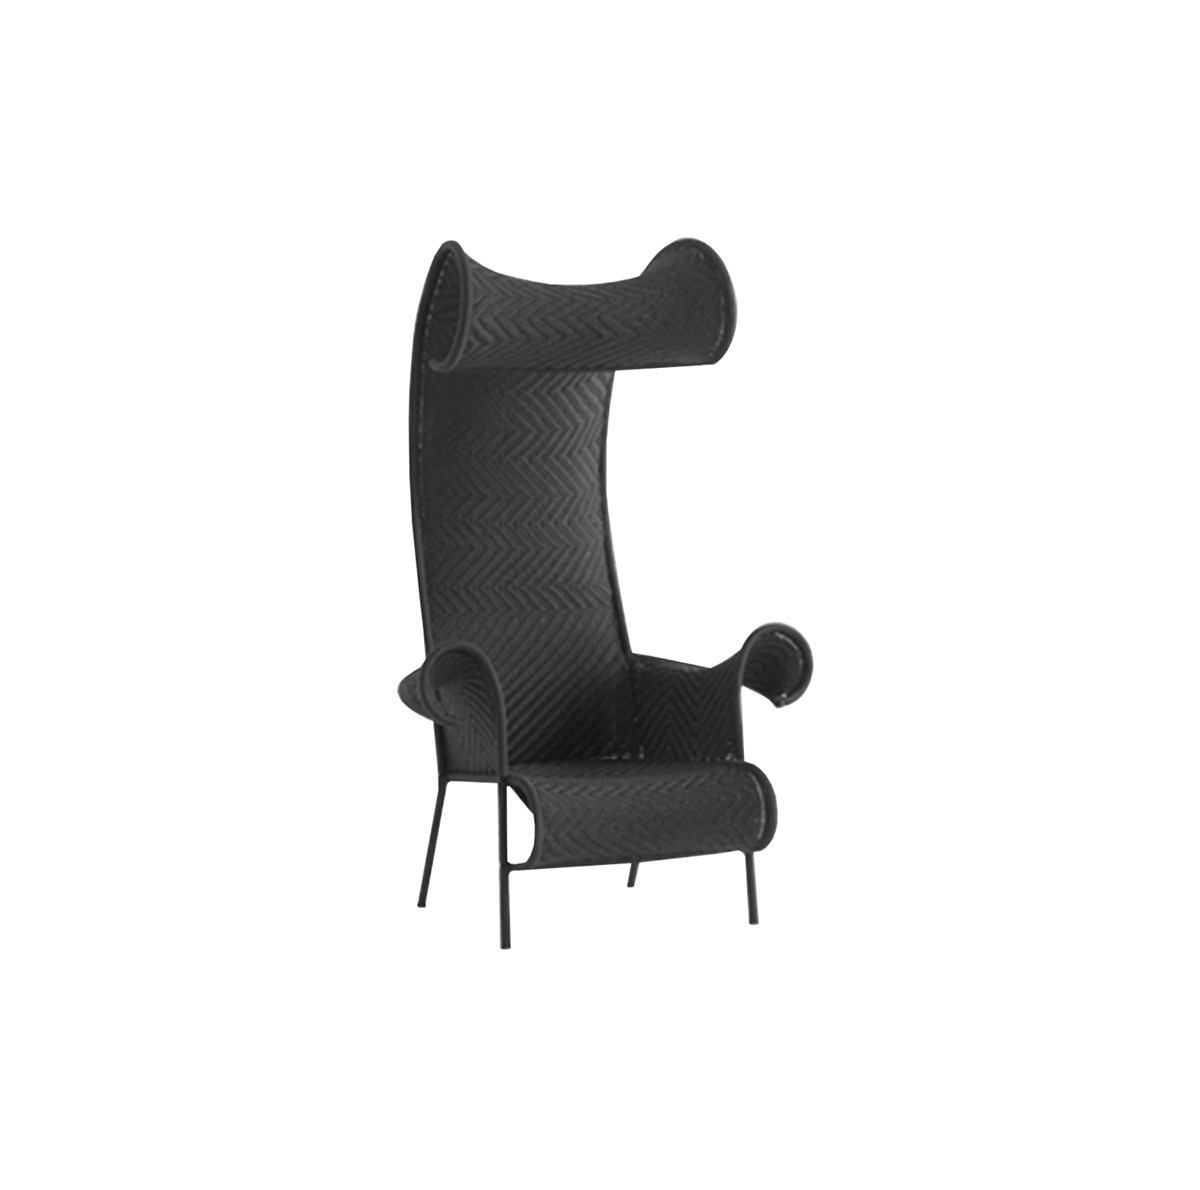 Moroso-Tord-Boontje-Shadowy-Outdoor-Armchair-Matisse-1